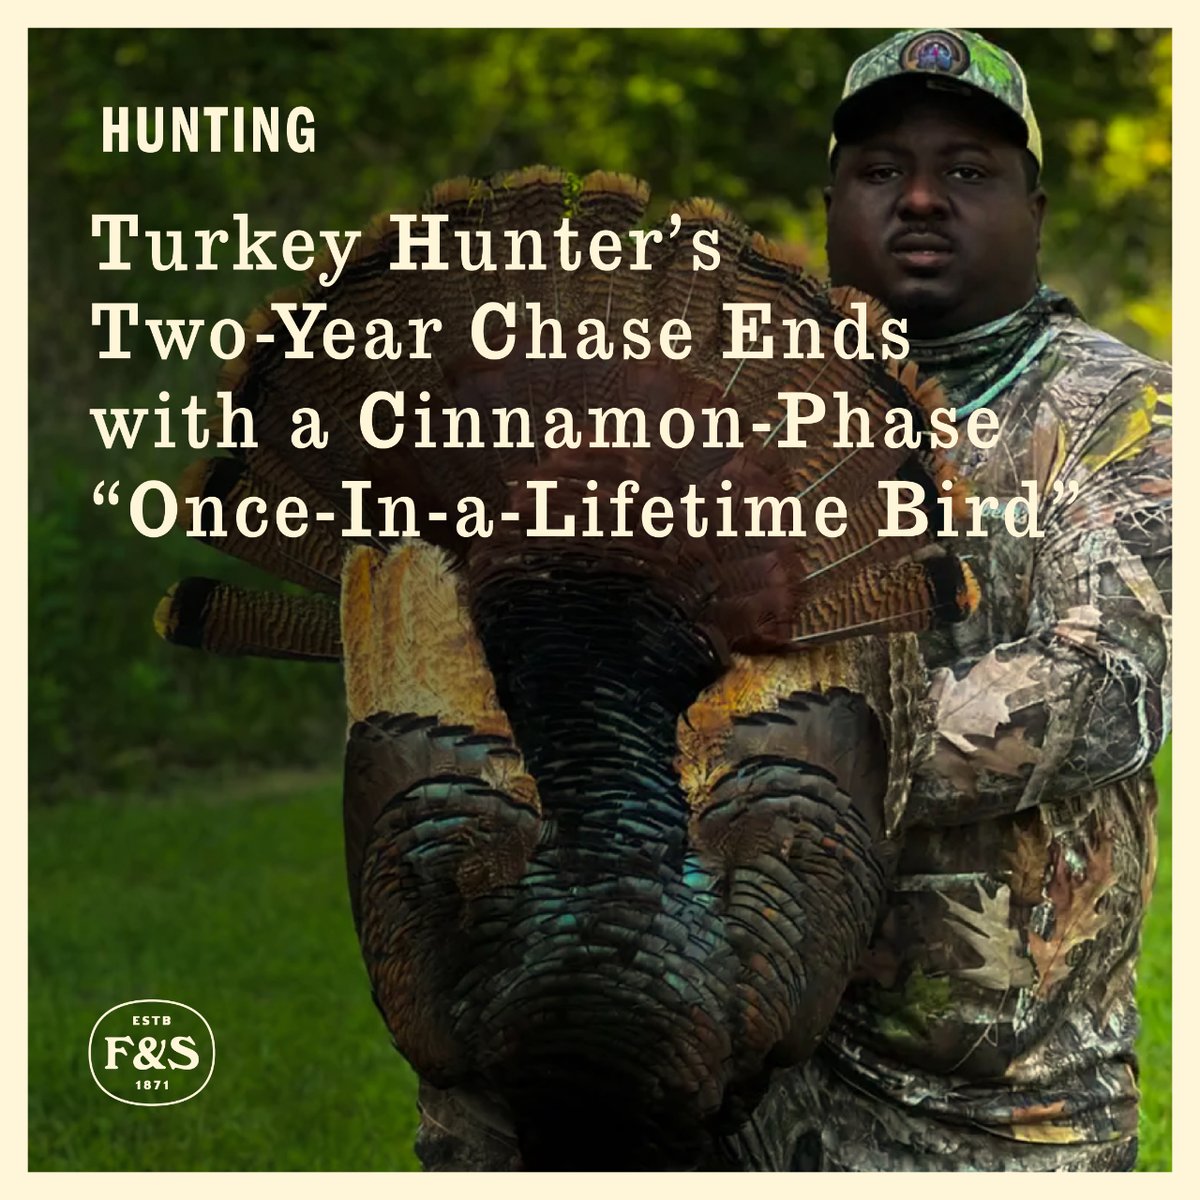 Georgia hunter Jamal Lane took this stunning cinnamon phase gobbler earlier this spring. It's just one of several unique colorations that occur naturally in wild turkeys.

Read the full story - fieldandstream.com/hunting/turkey… 🦃

#TheLegendLives #TurkeyHunting #TurkeySeason